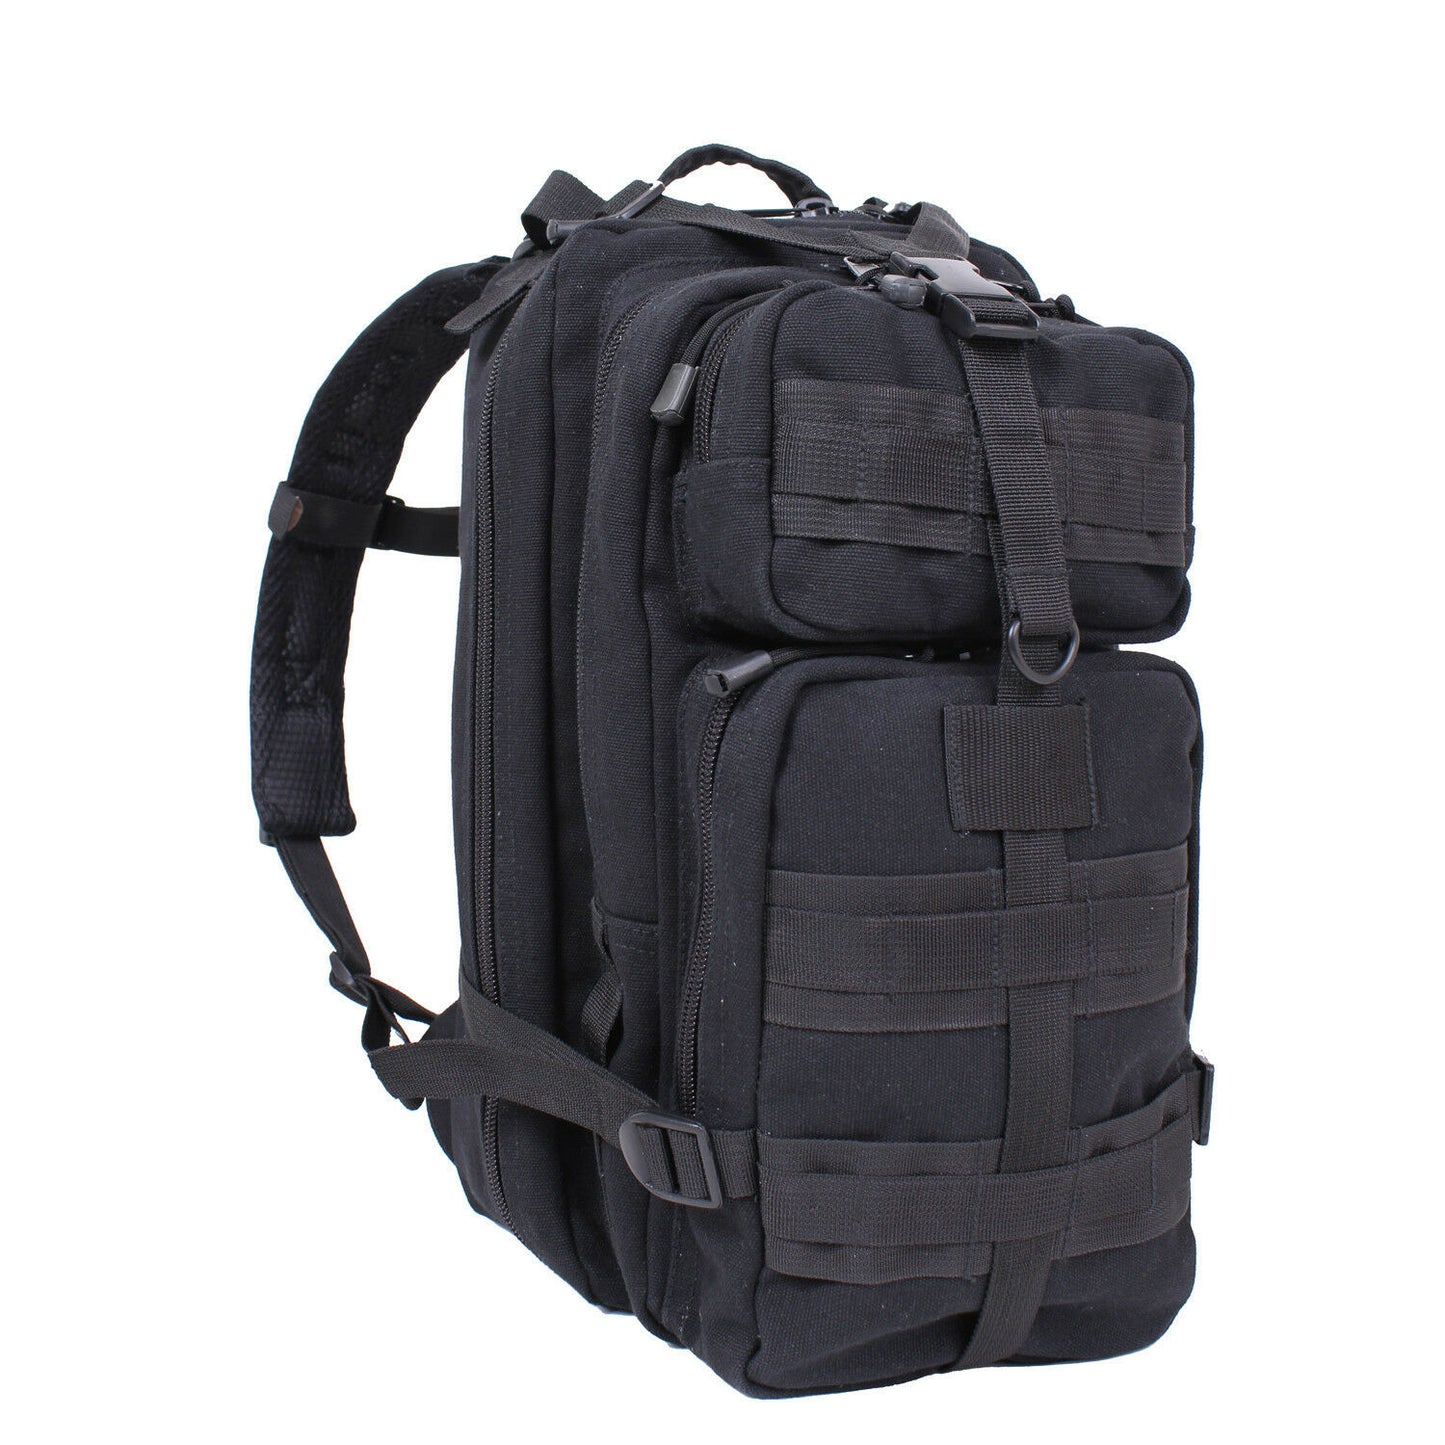 Rothco Tacticanvas Canvas Medium Transport Go Pack Backpack